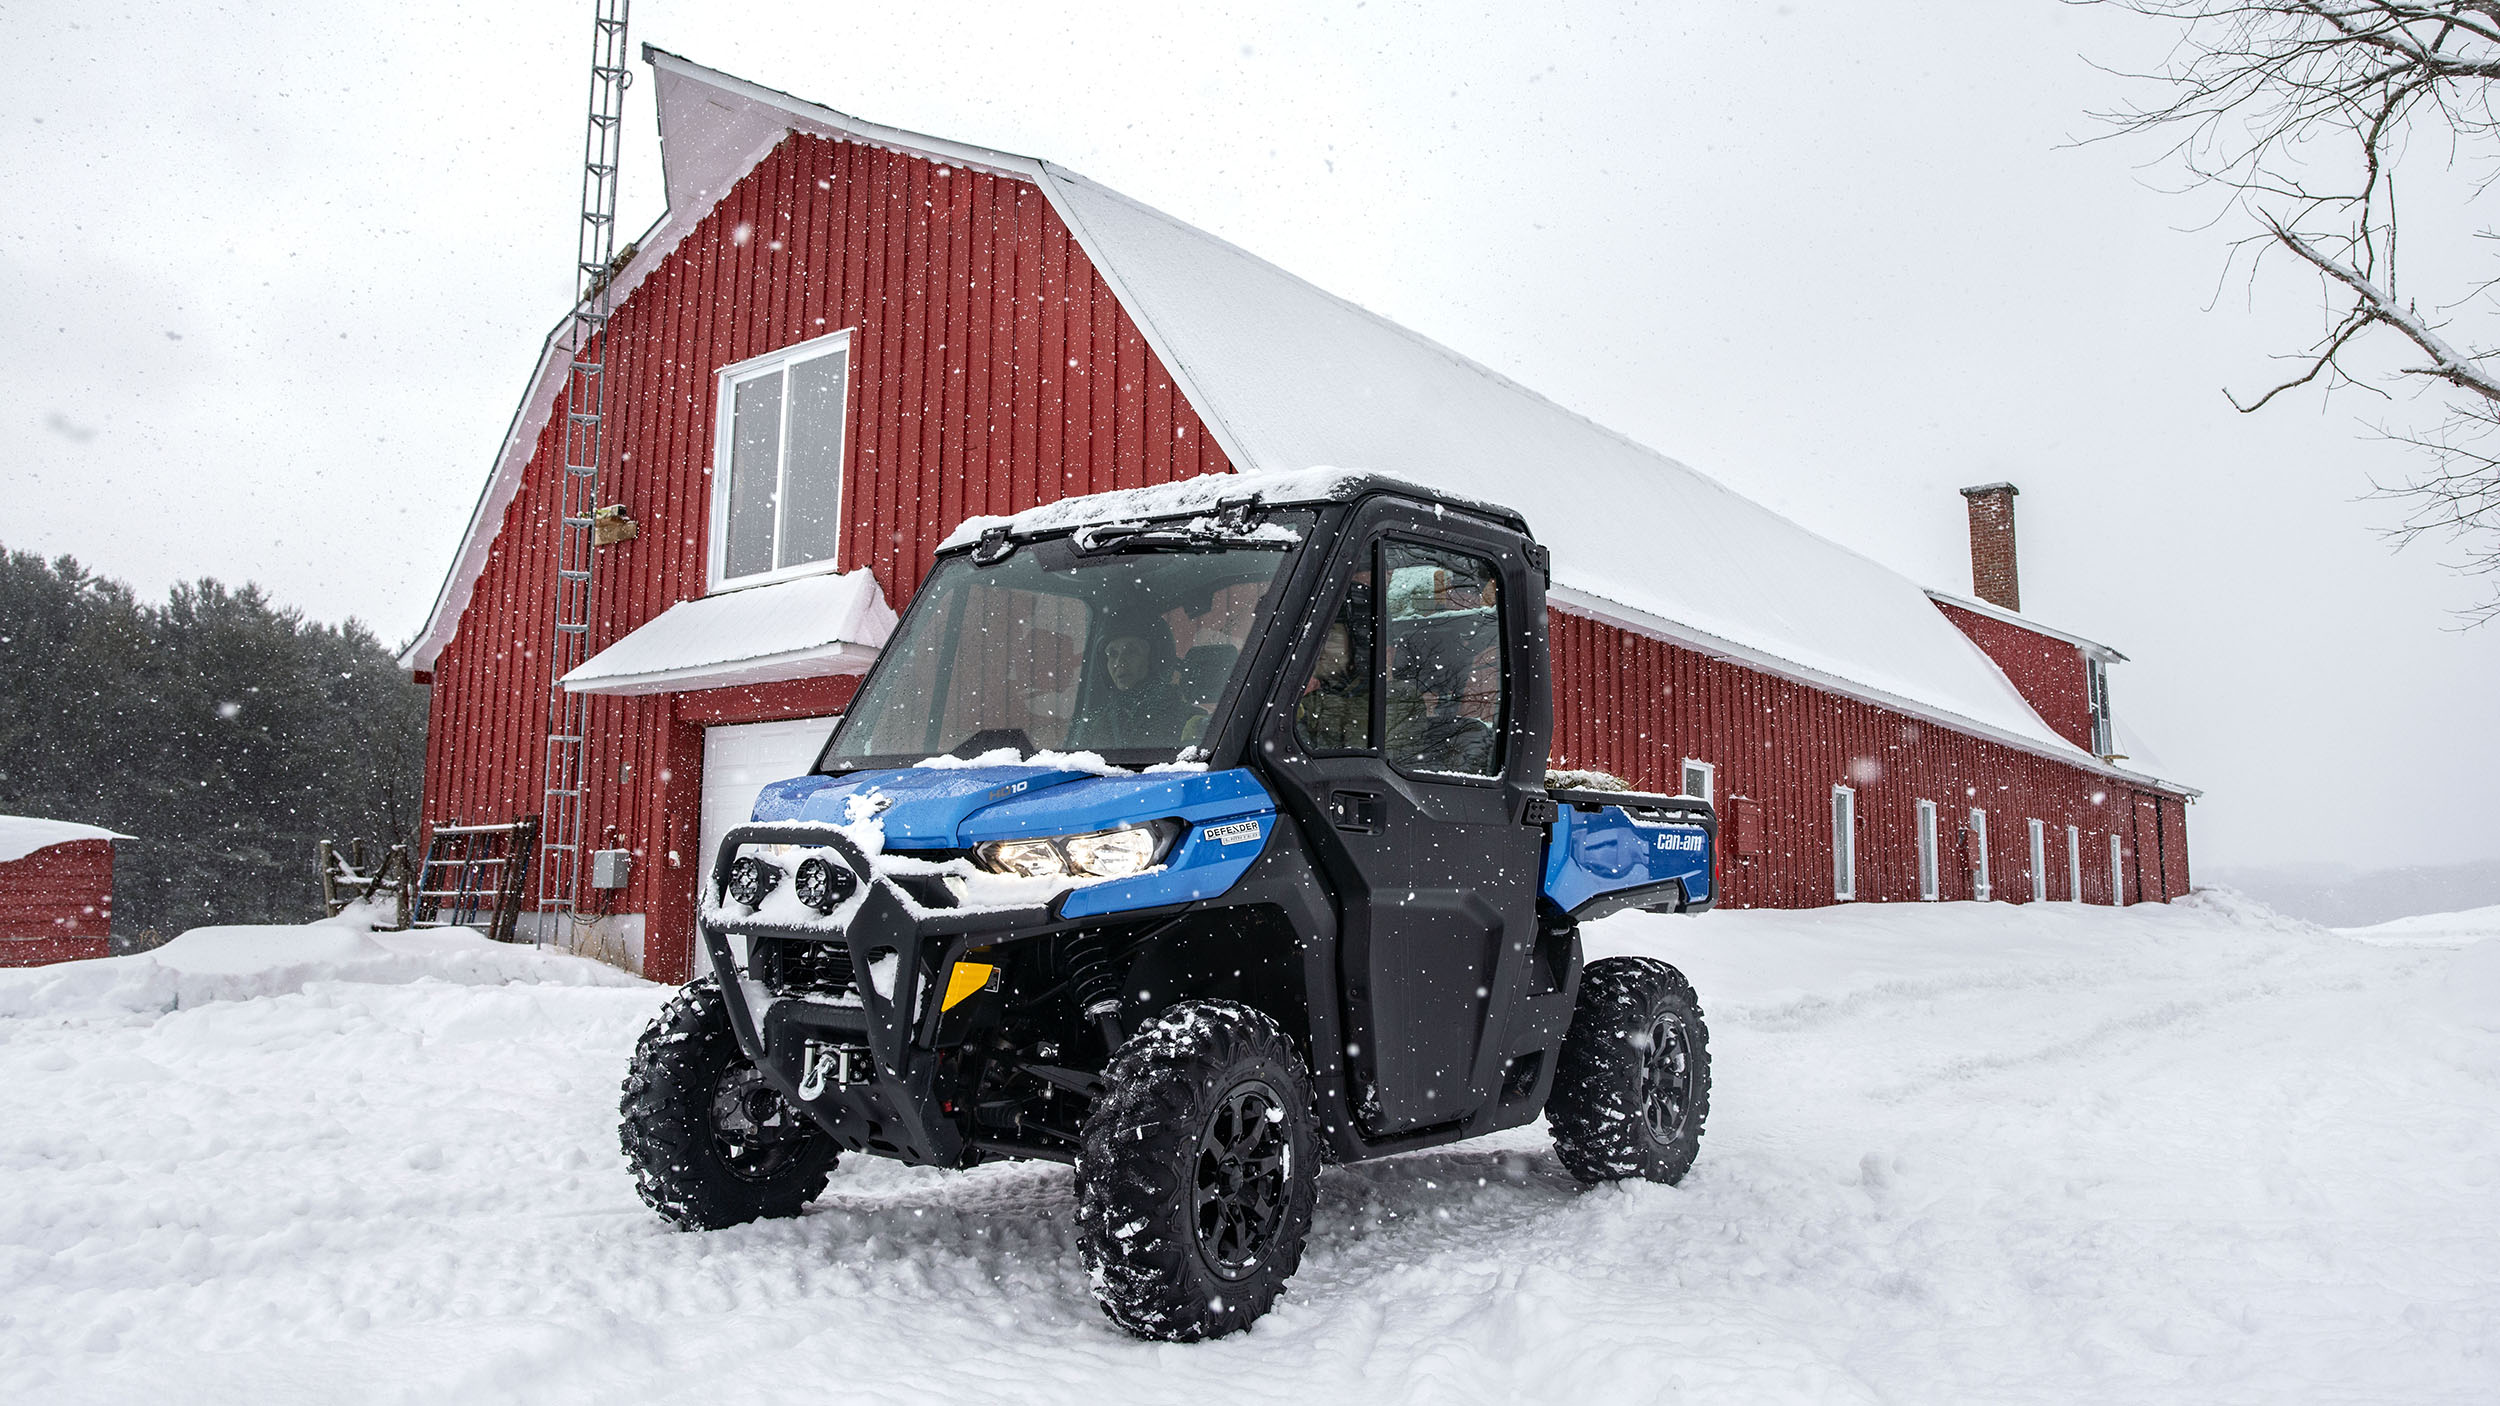 A Can-Am Defender in front of a building